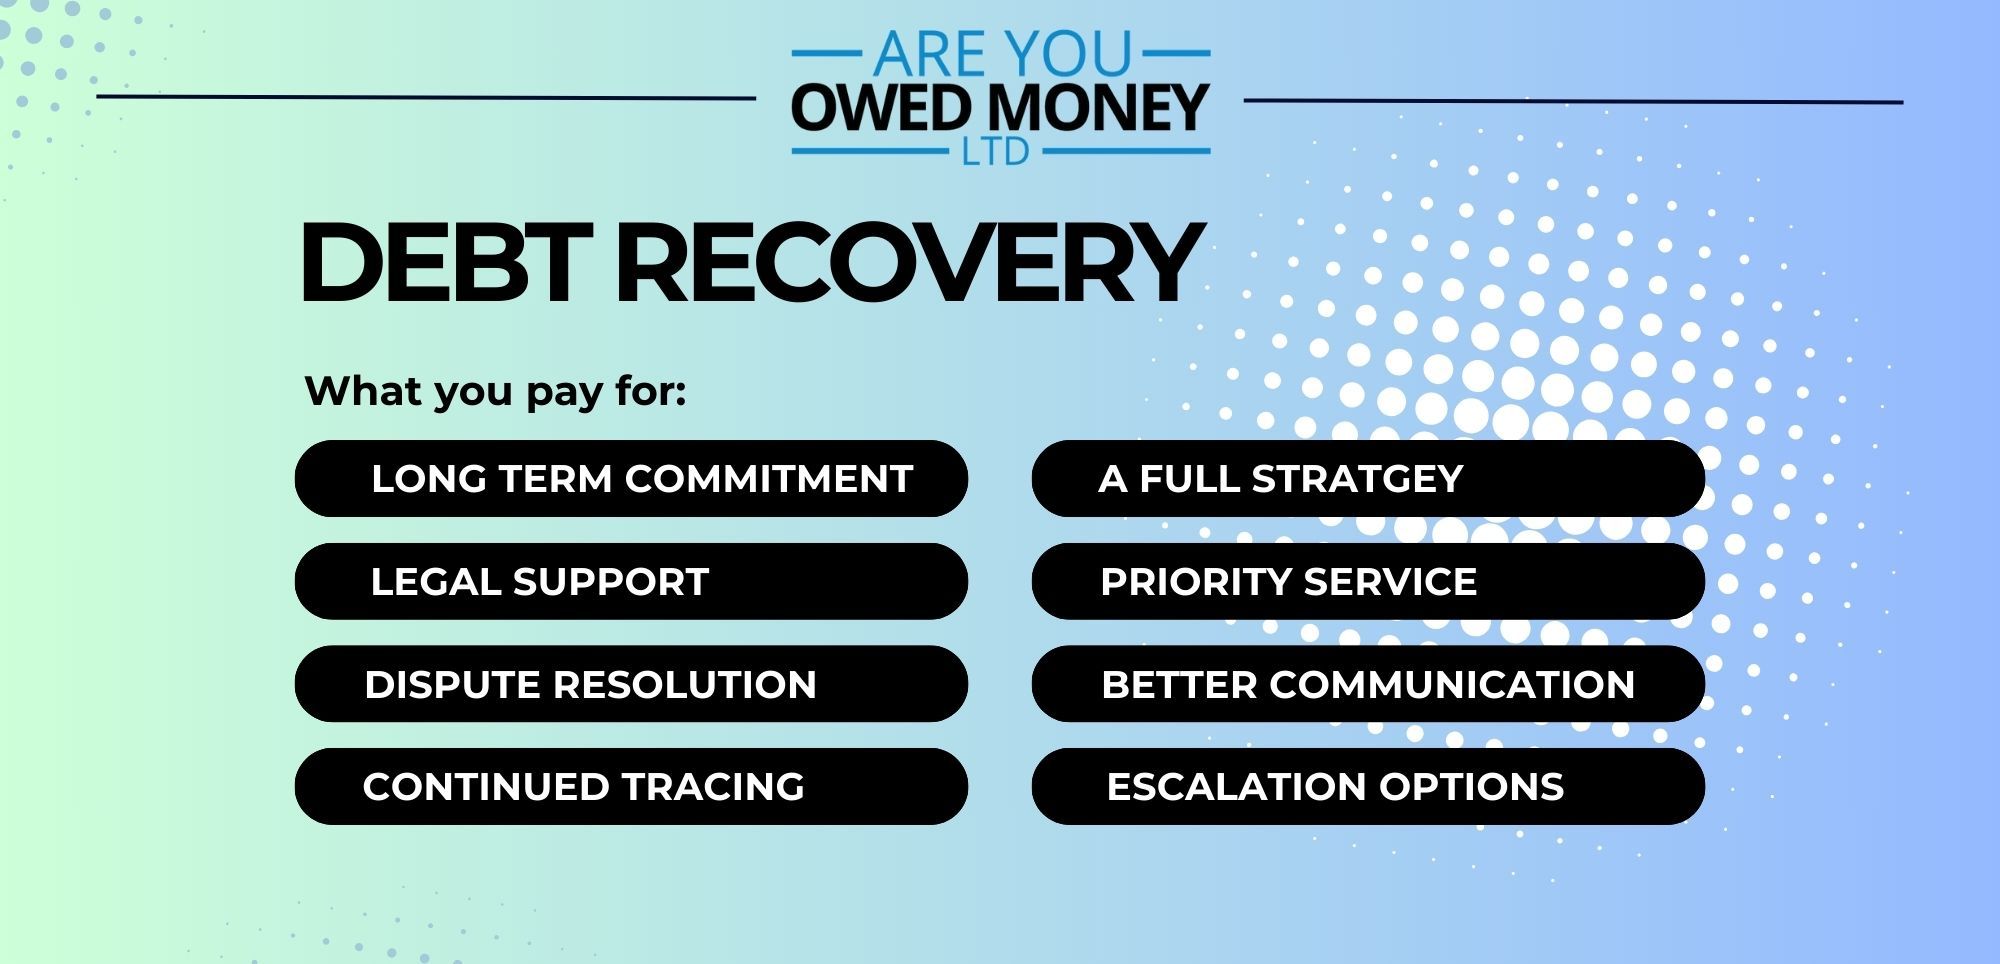 Debt Recovery: what you pay for